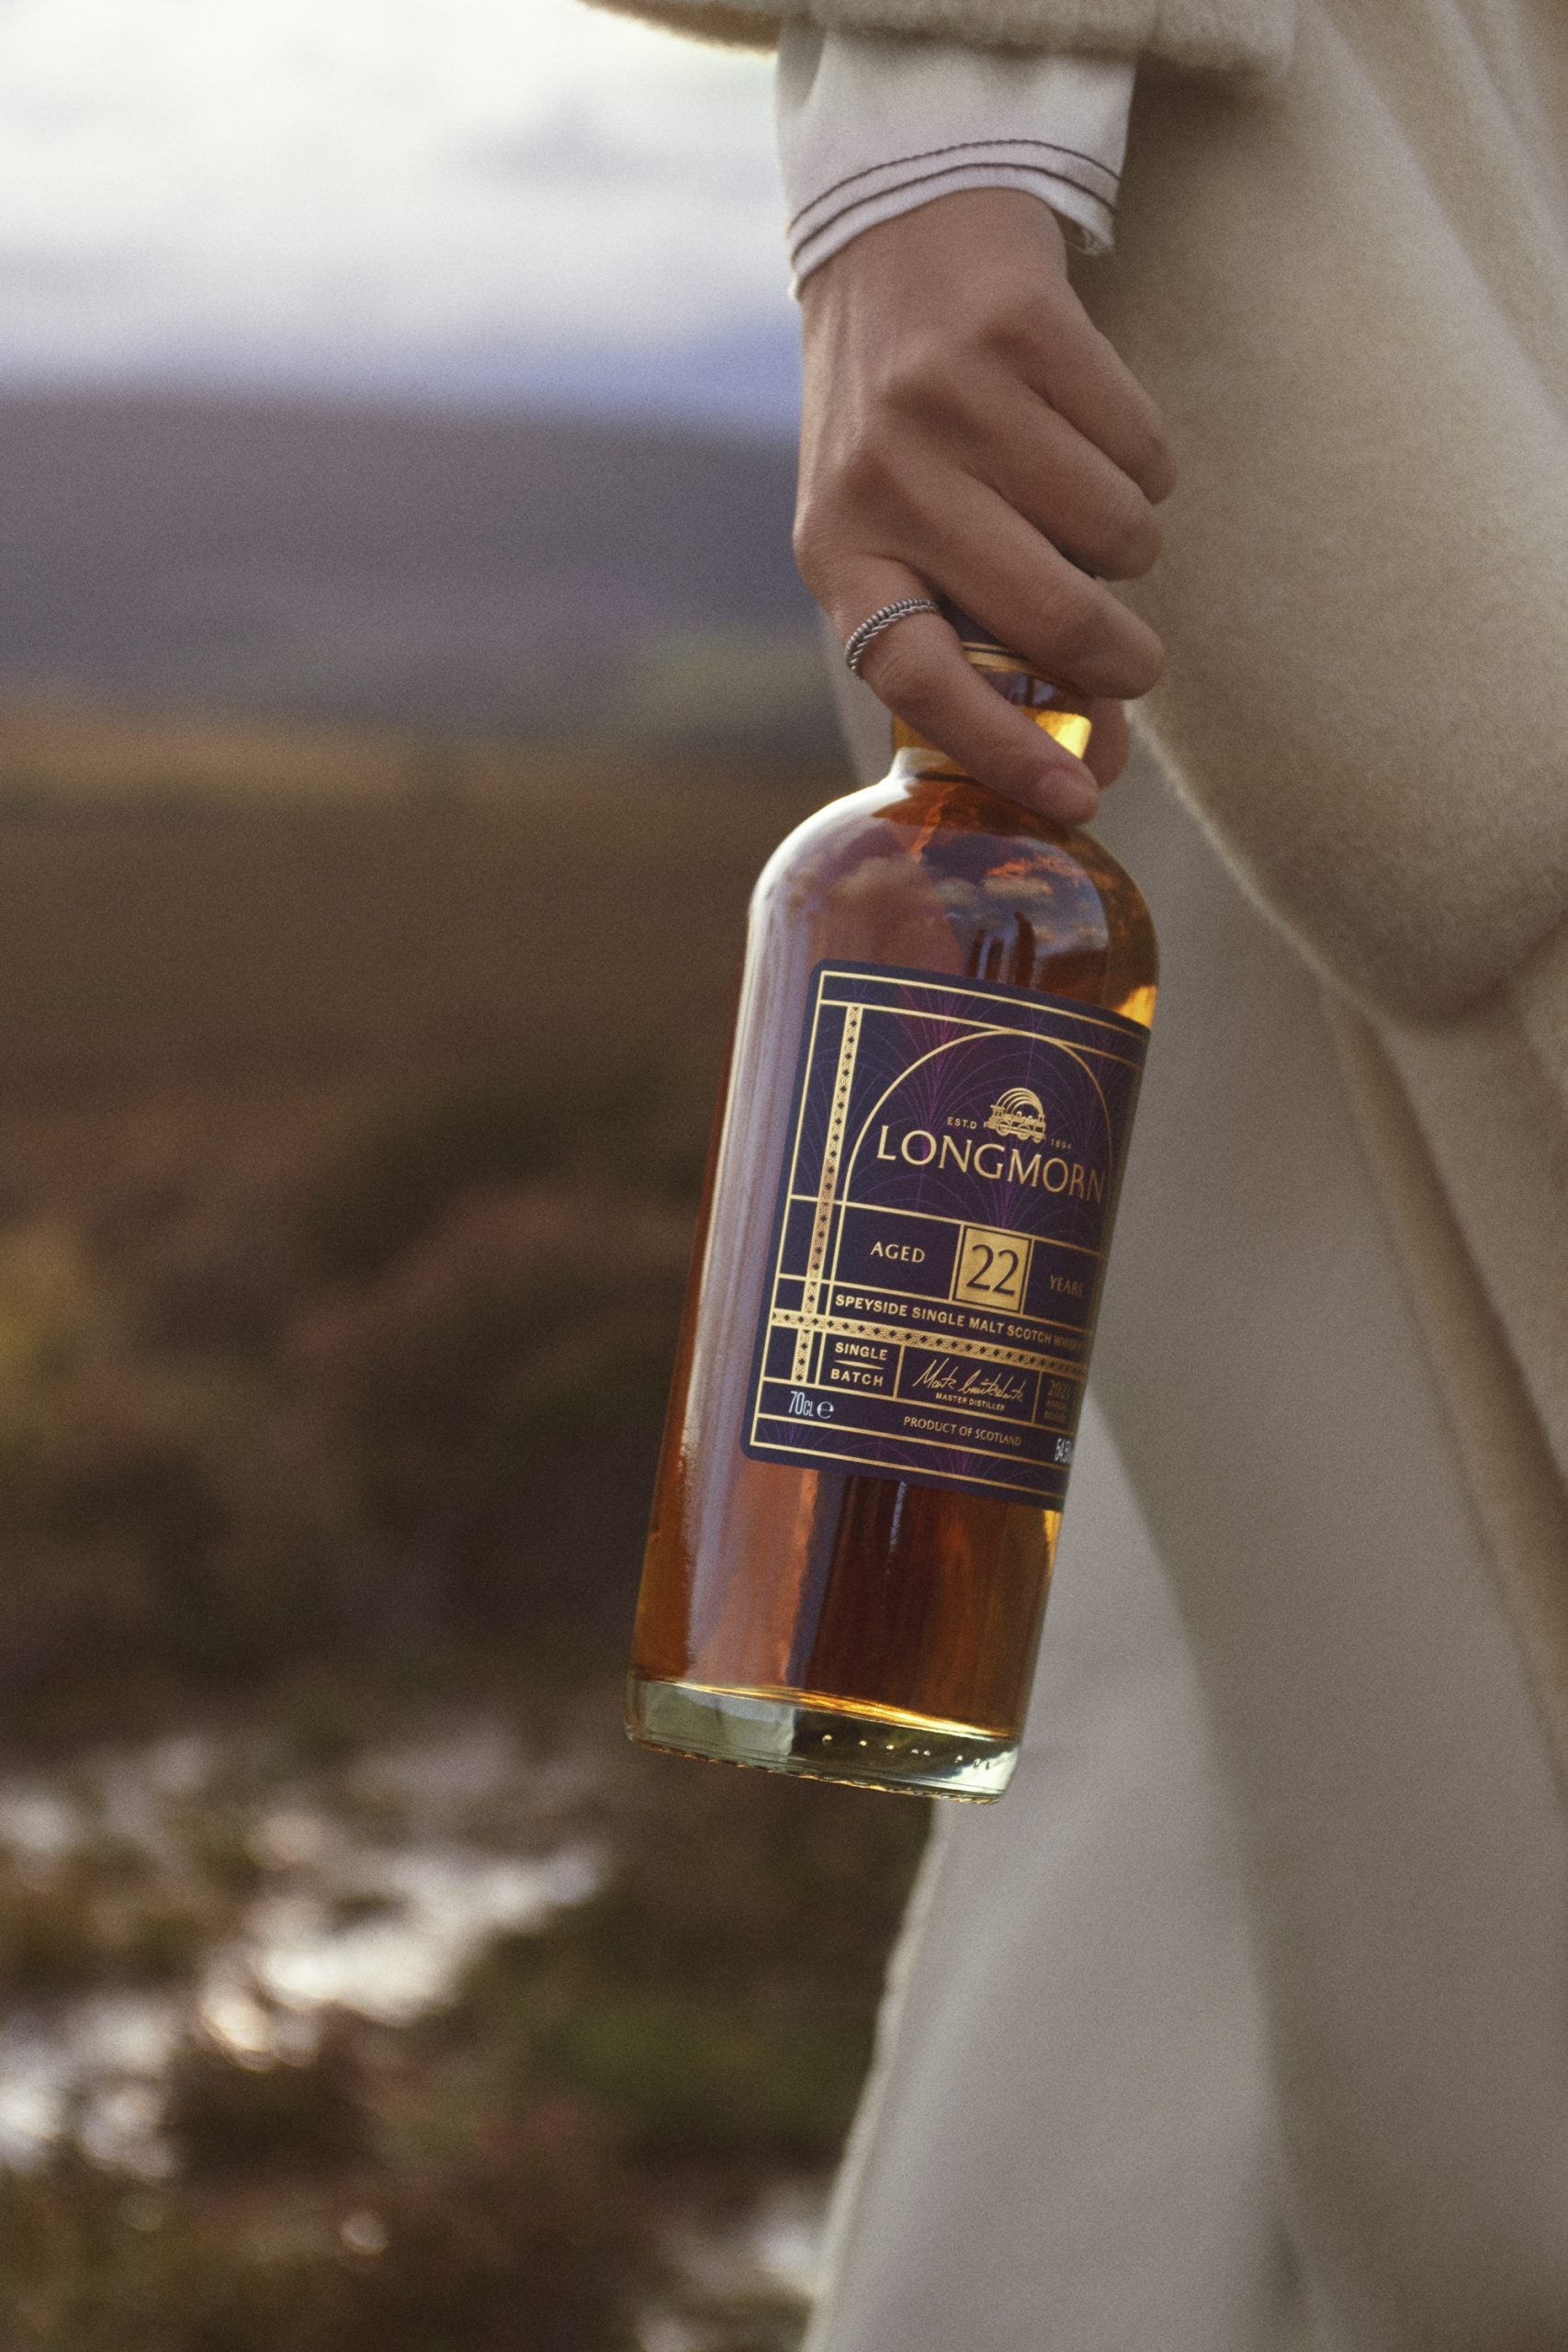 A womans hand holding a bottle of 22 Year Old Longmorn Whisky